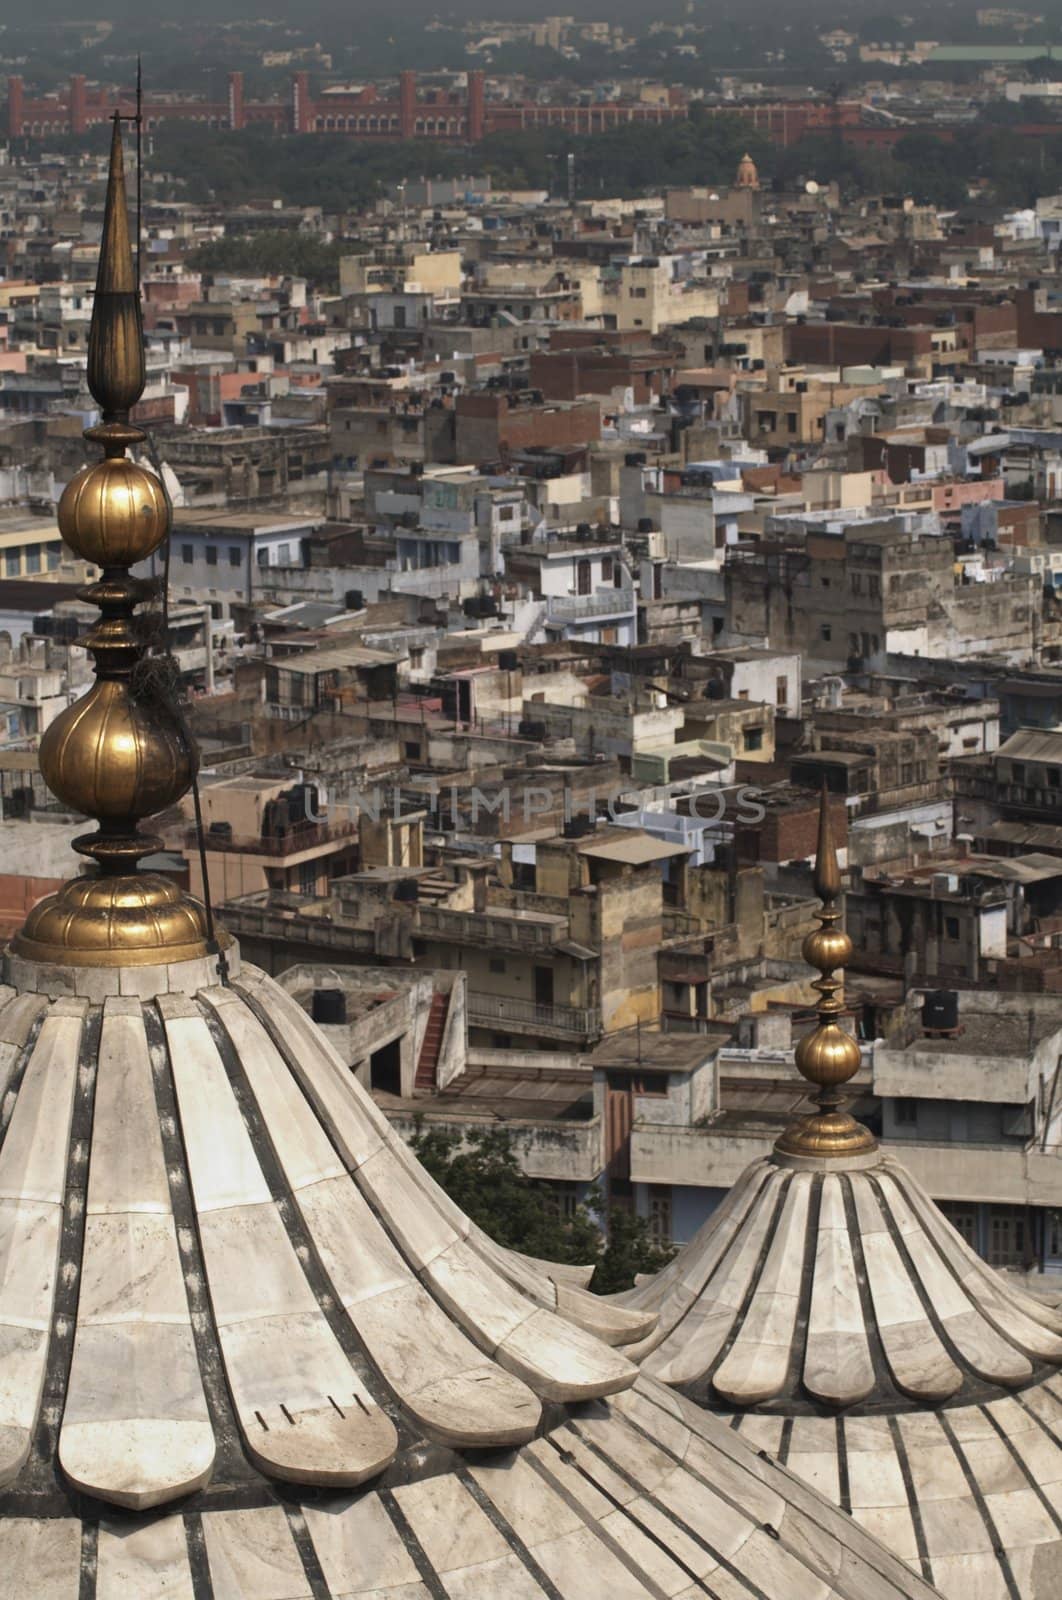 The Domes of the Friday Mosque (Jama Masjid) in Old Delhi, India